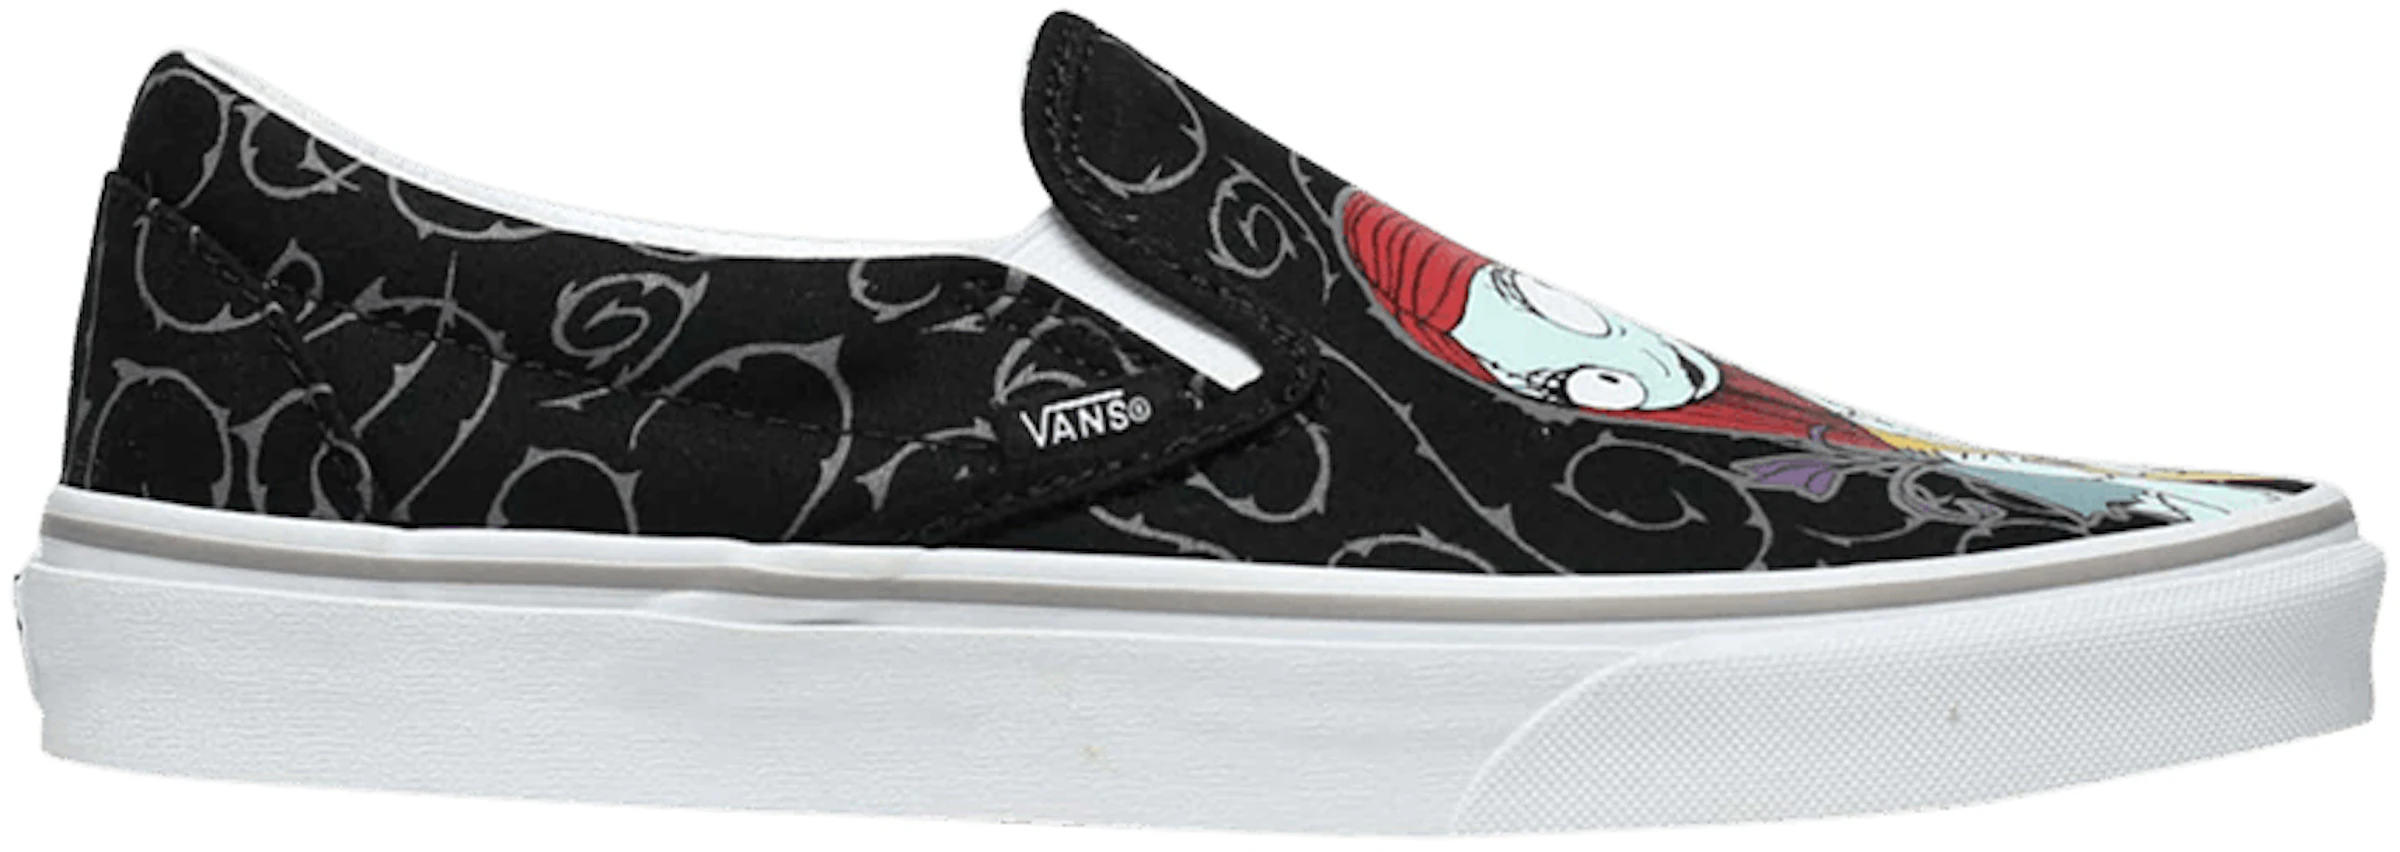 Vans Classic Slip-On The Nightmare Before Christmas Jack and Sally - VN0A4BV3TA3 -